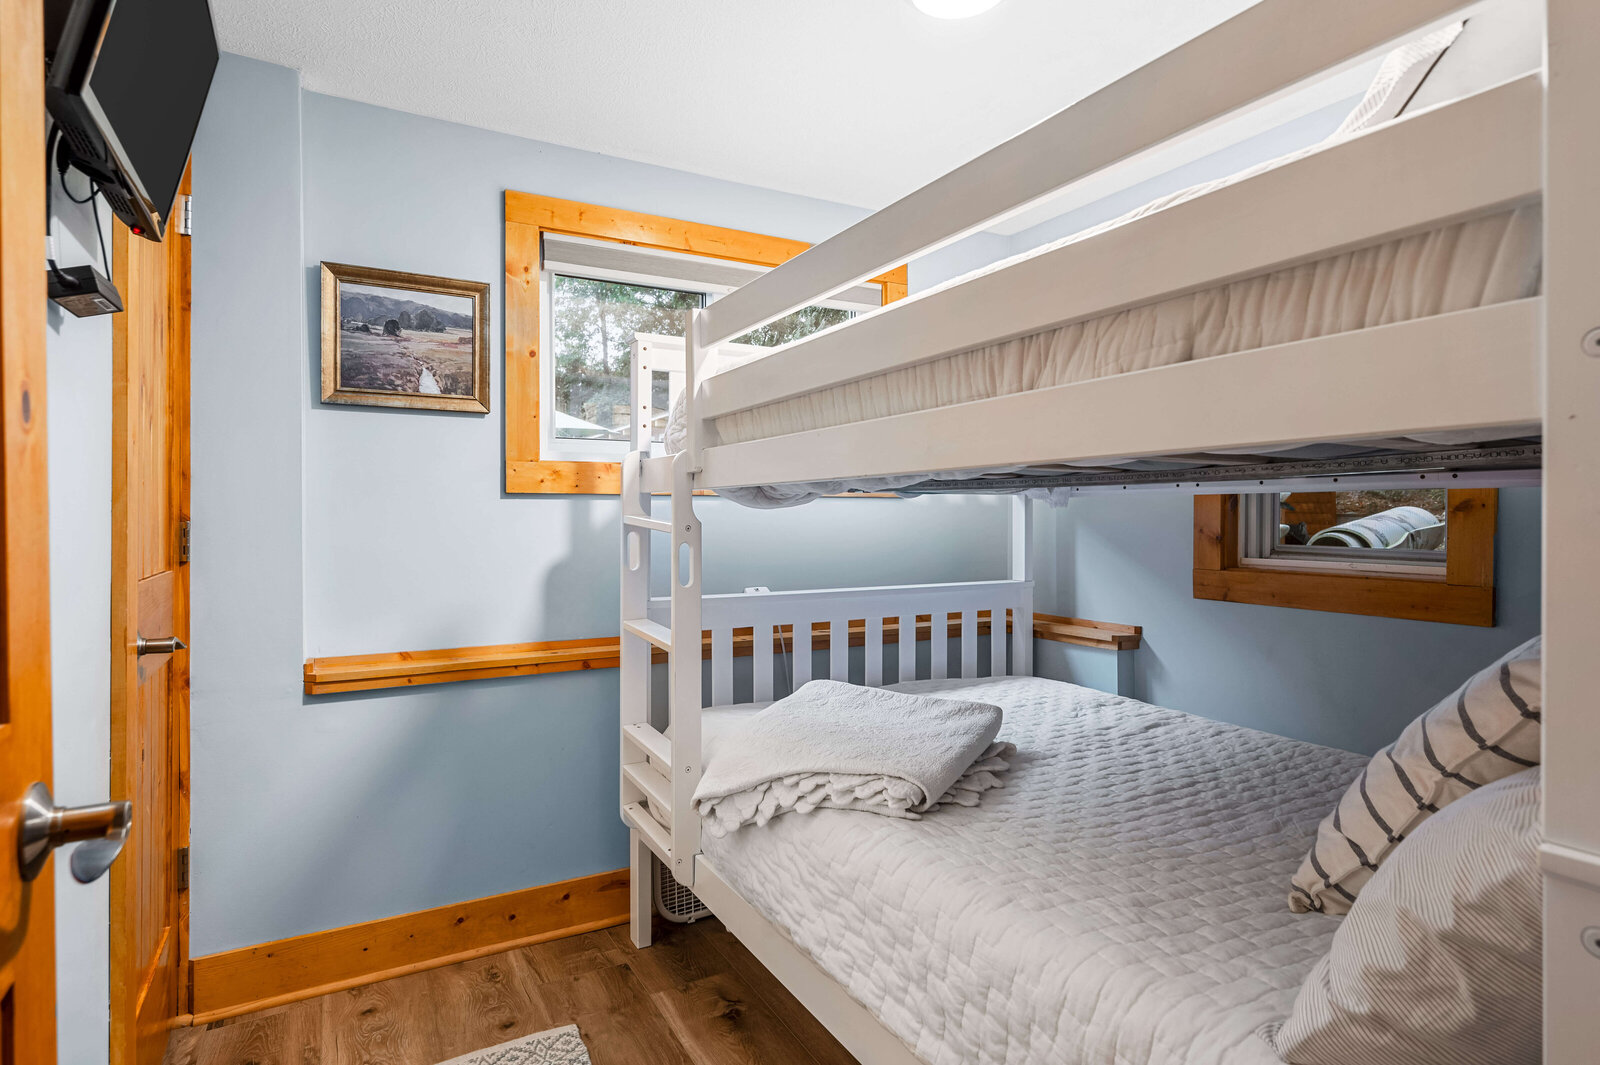 Bunk beds in guest bedroom of lake house